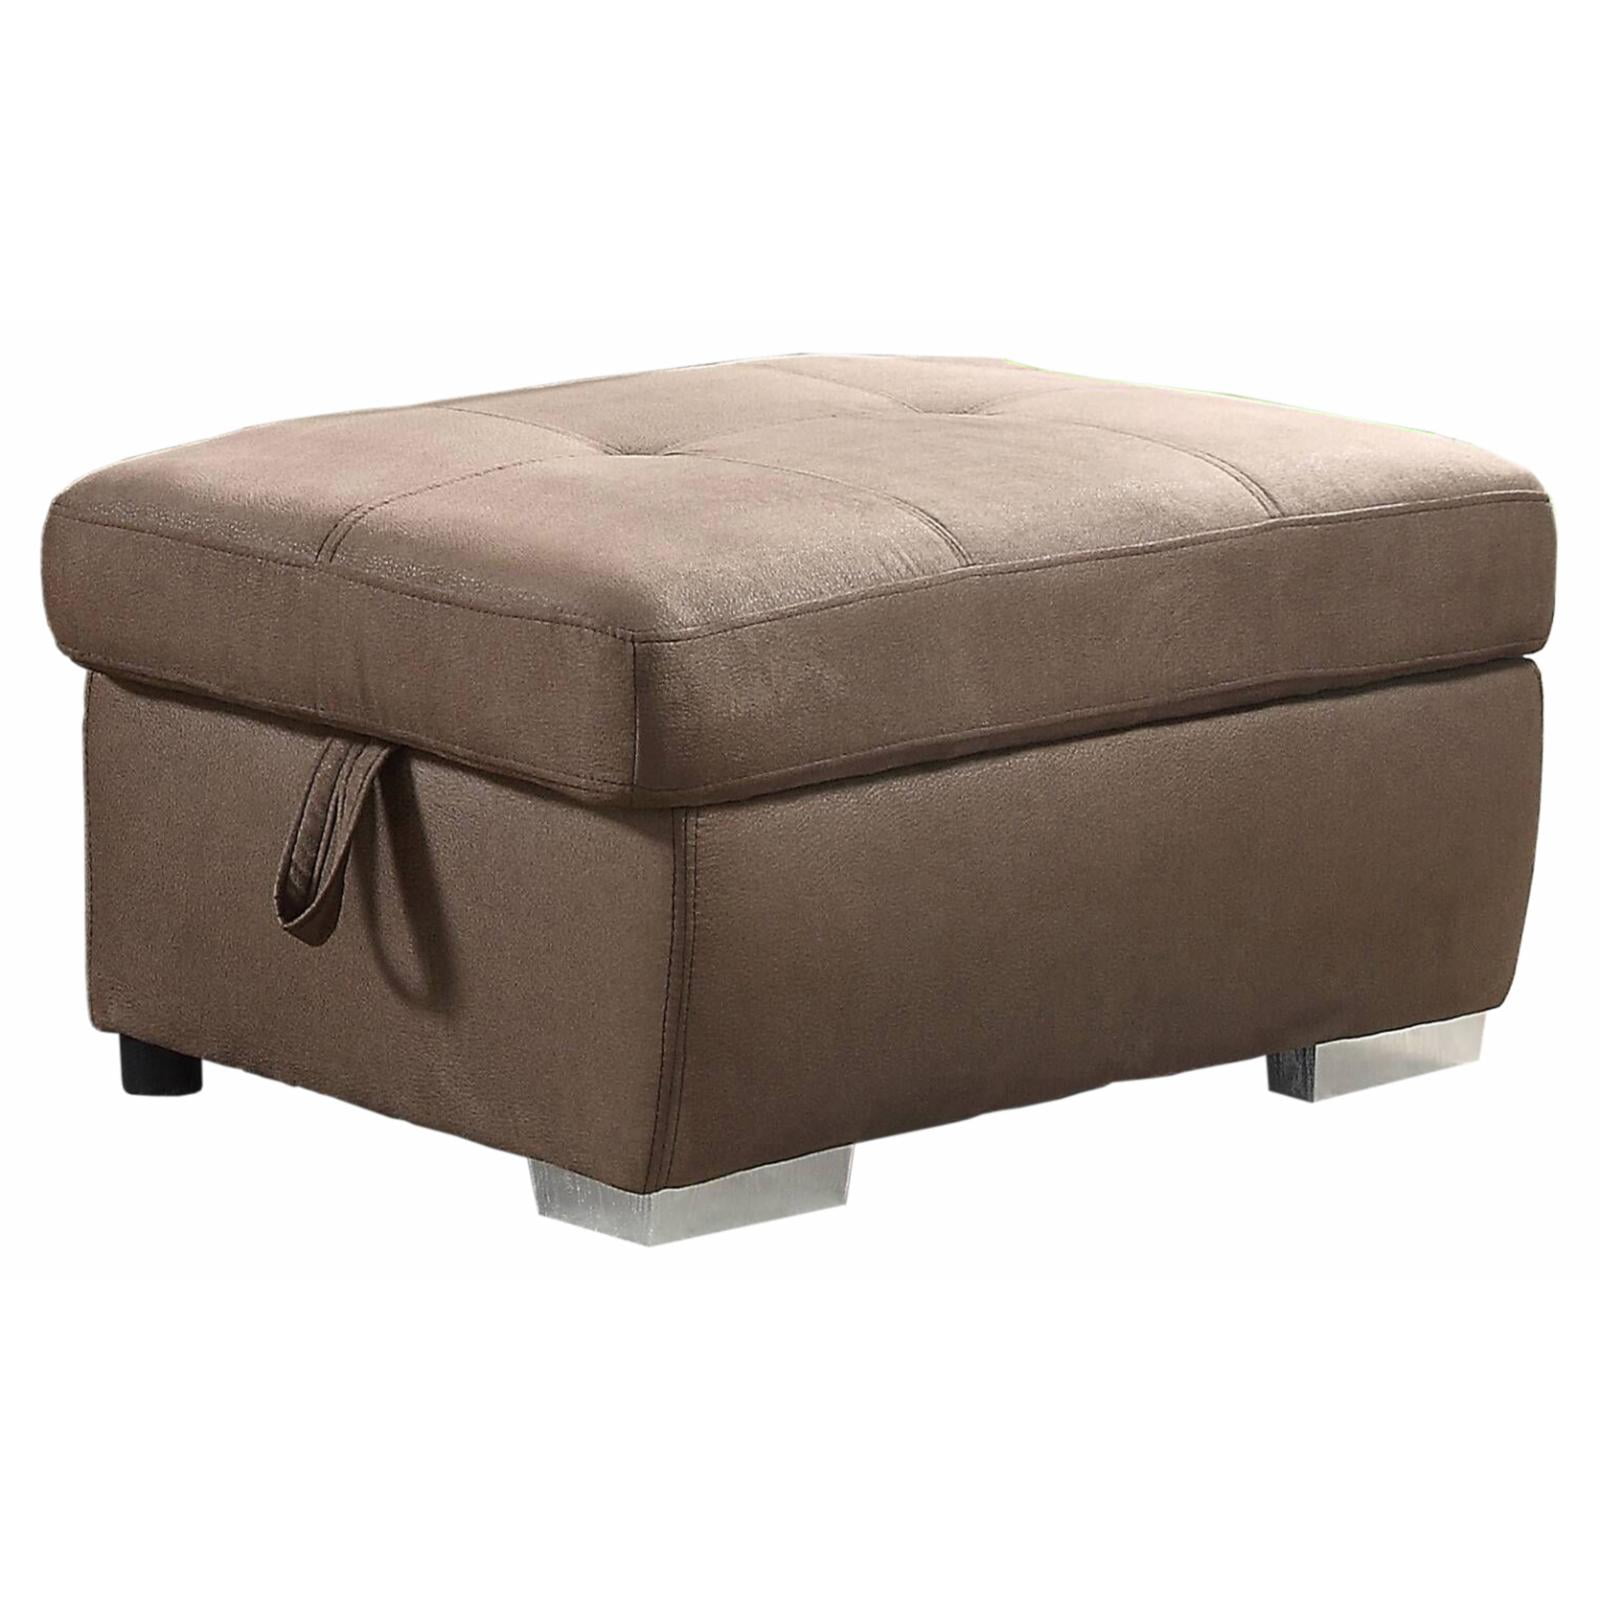 Picture of Acme Furniture LV01026 40 x 23 x 20 in. Acoose Ottoman with Storage, Brown Fabric